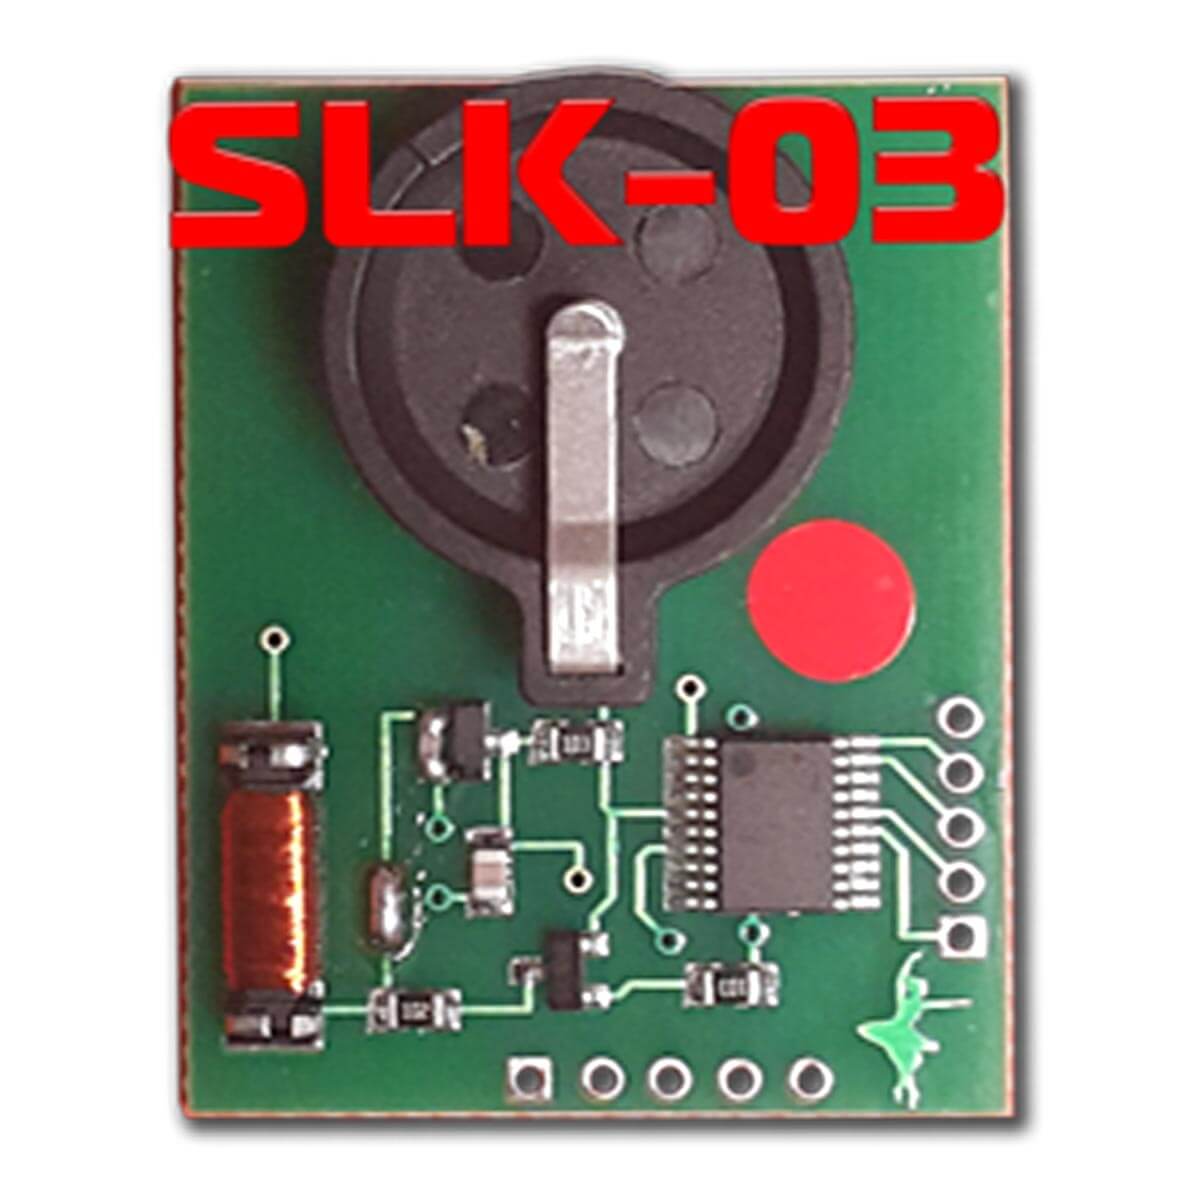 SLK-03 Tango Emulator For Toyota, Lexus Smart Key System With DST AES Page1  88 & A8